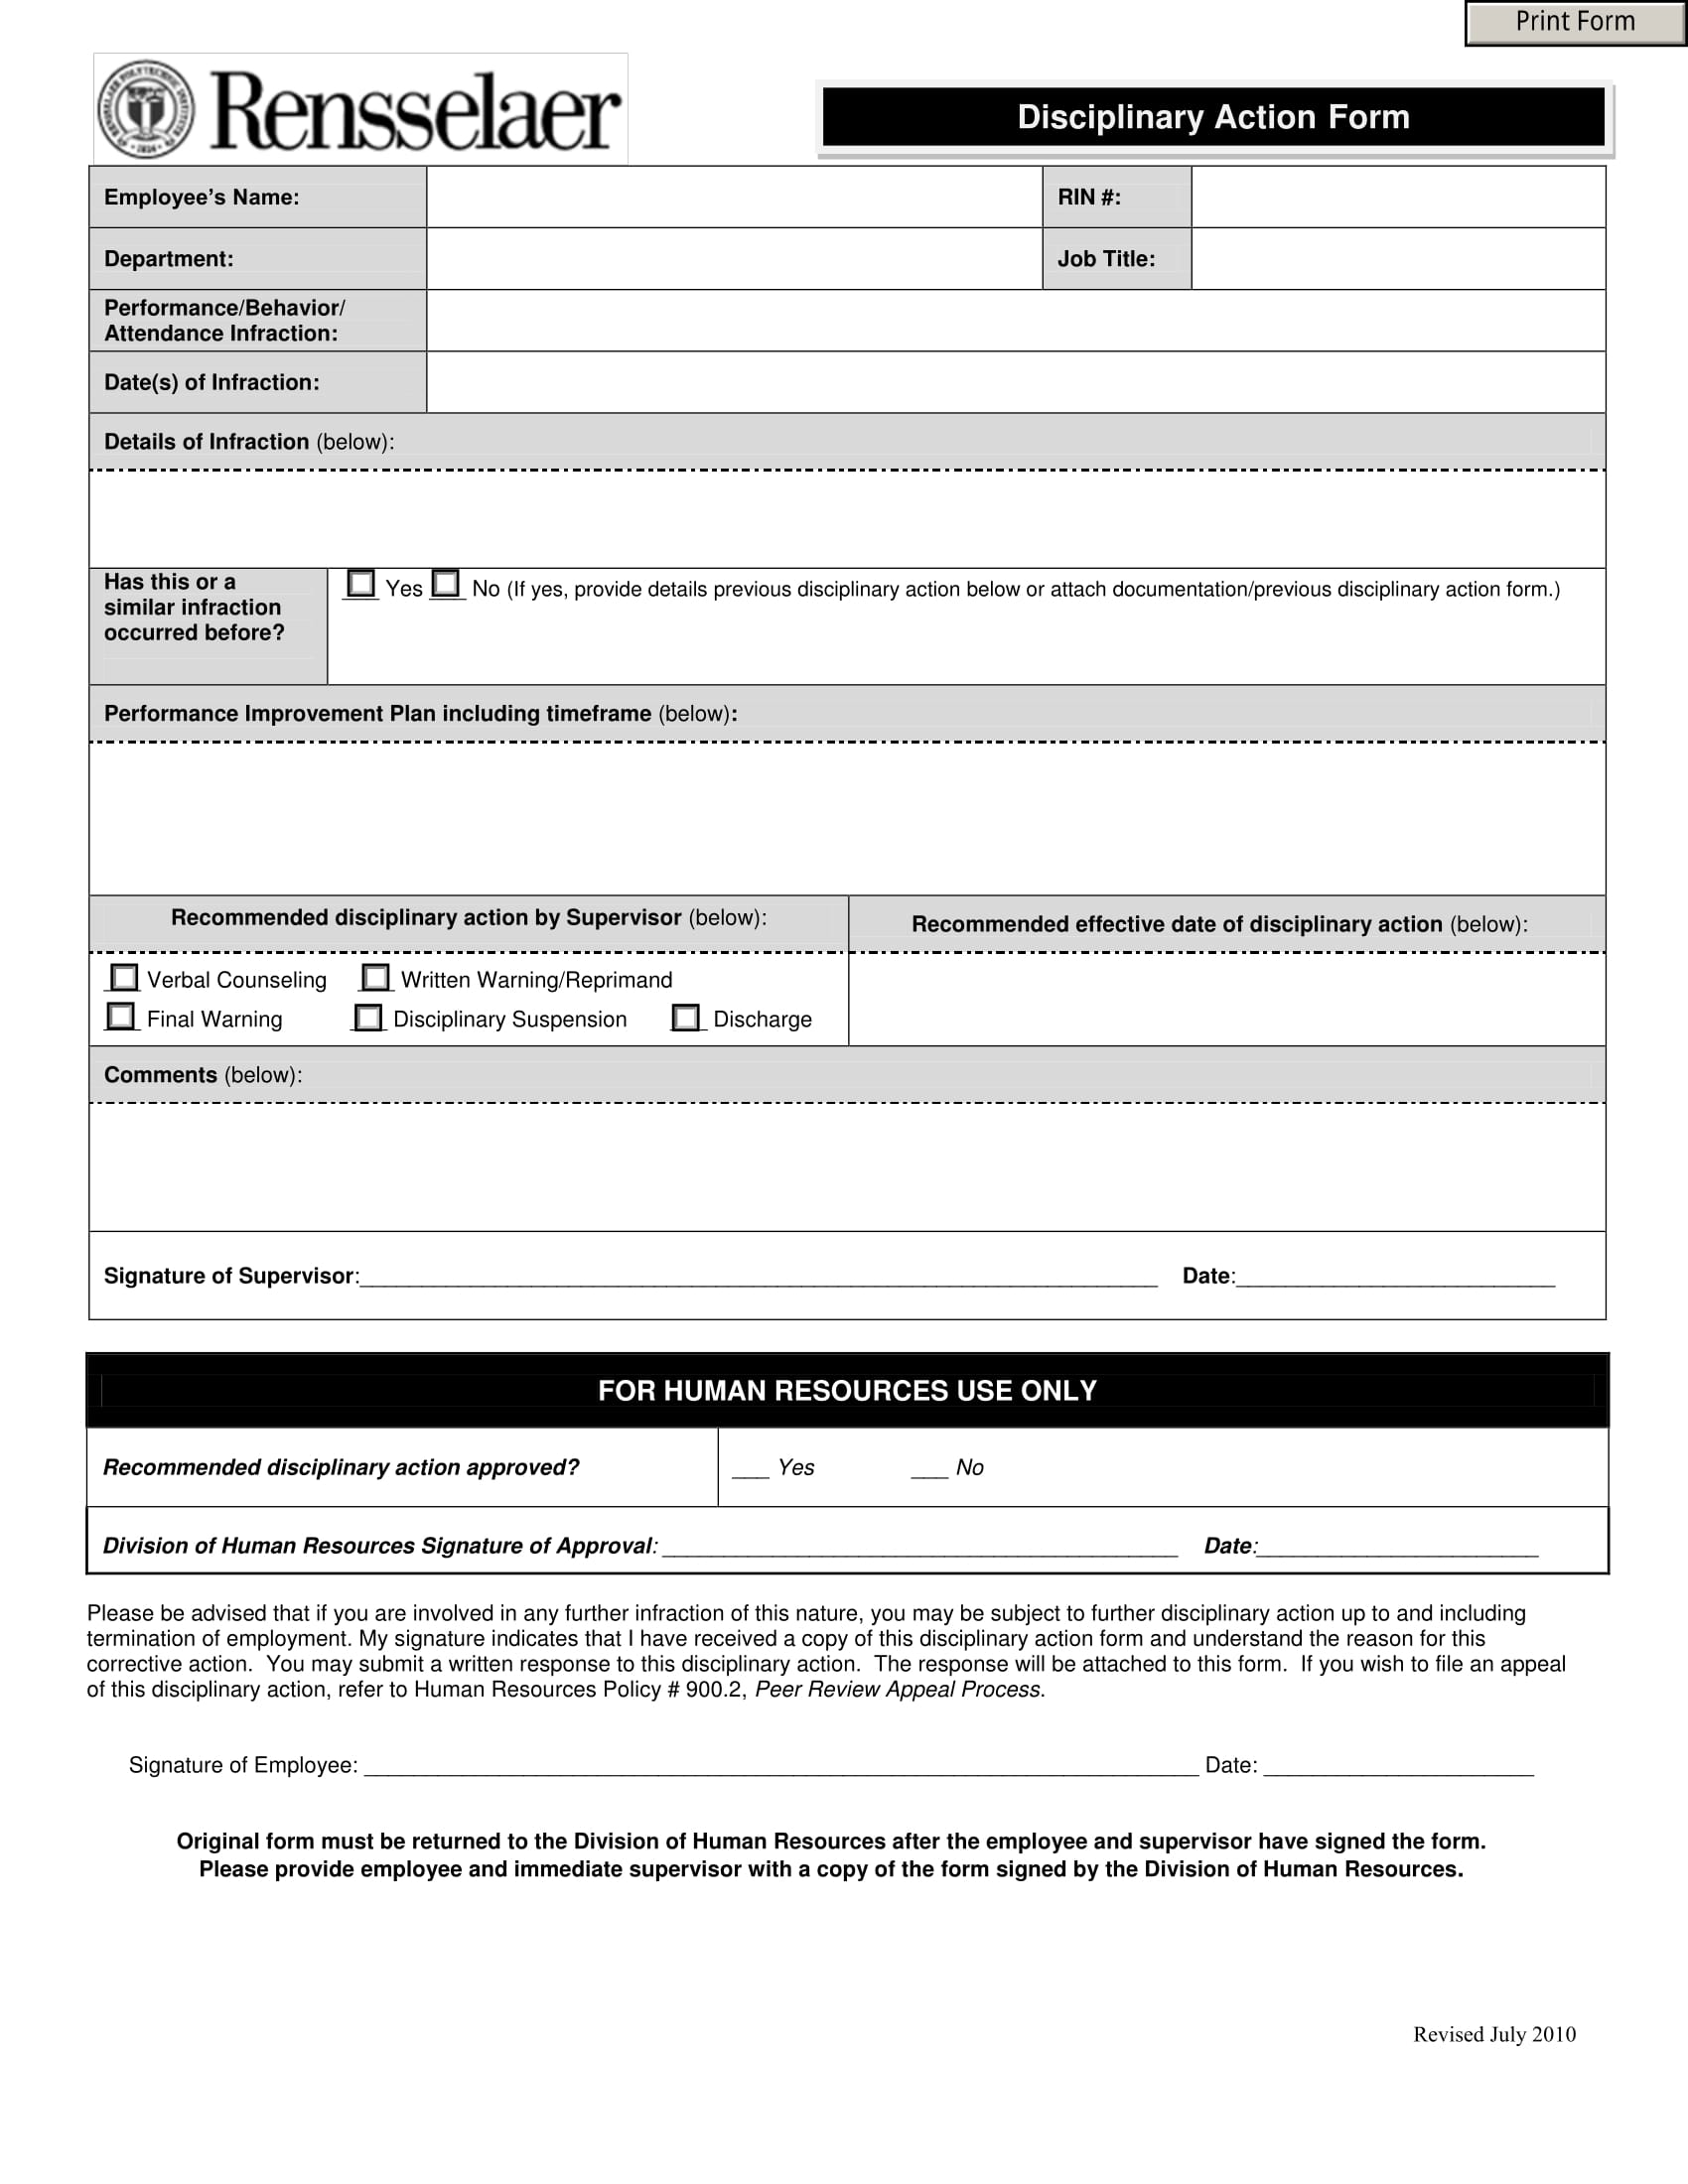 FREE 3 Employee Disciplinary Action Forms In MS Word PDF